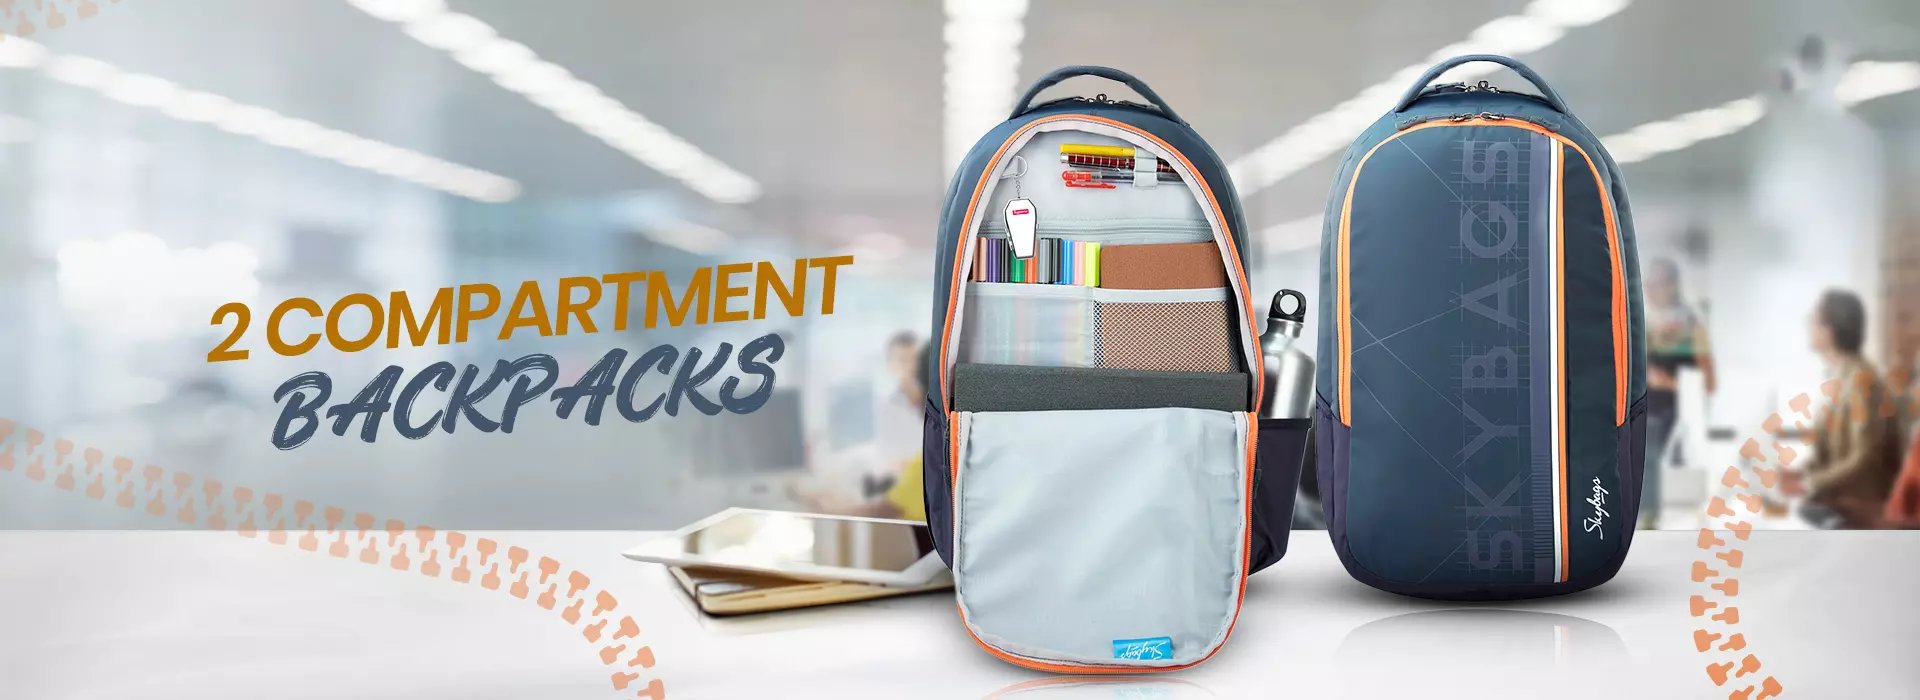 2 Compartment Backpack